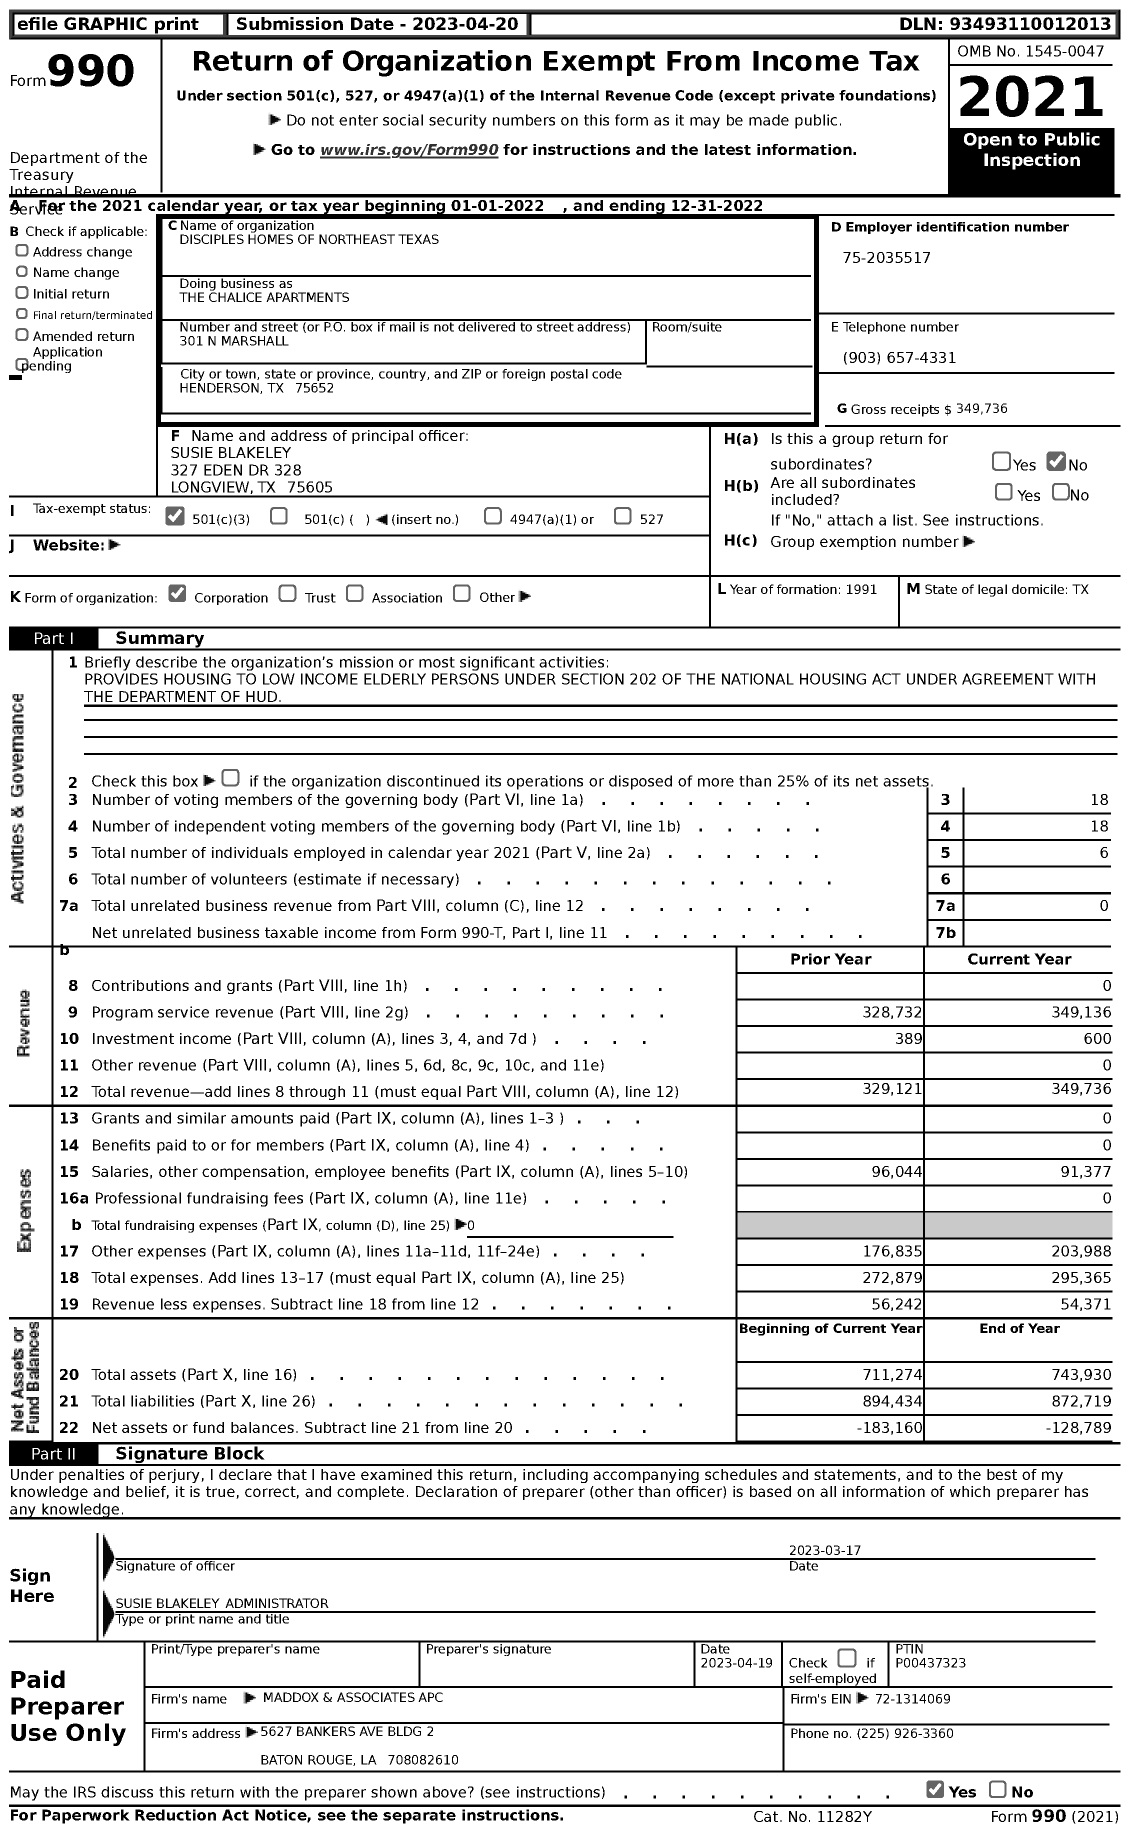 Image of first page of 2022 Form 990 for The Chalice Apartments